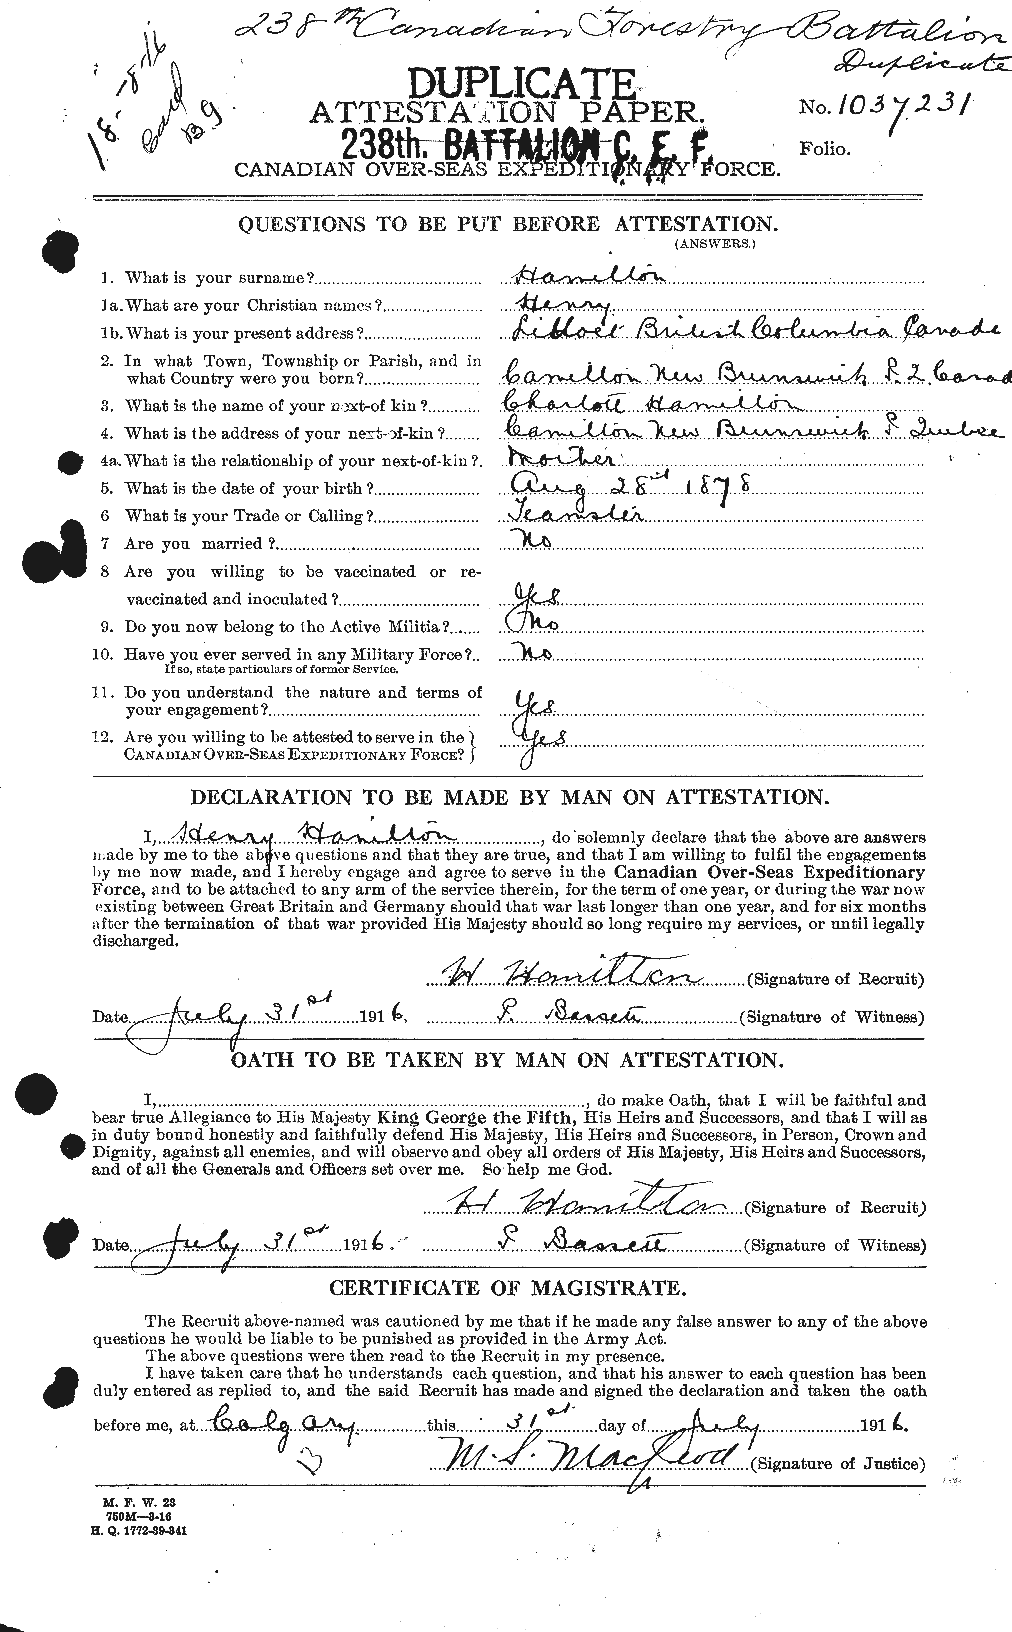 Personnel Records of the First World War - CEF 372522a